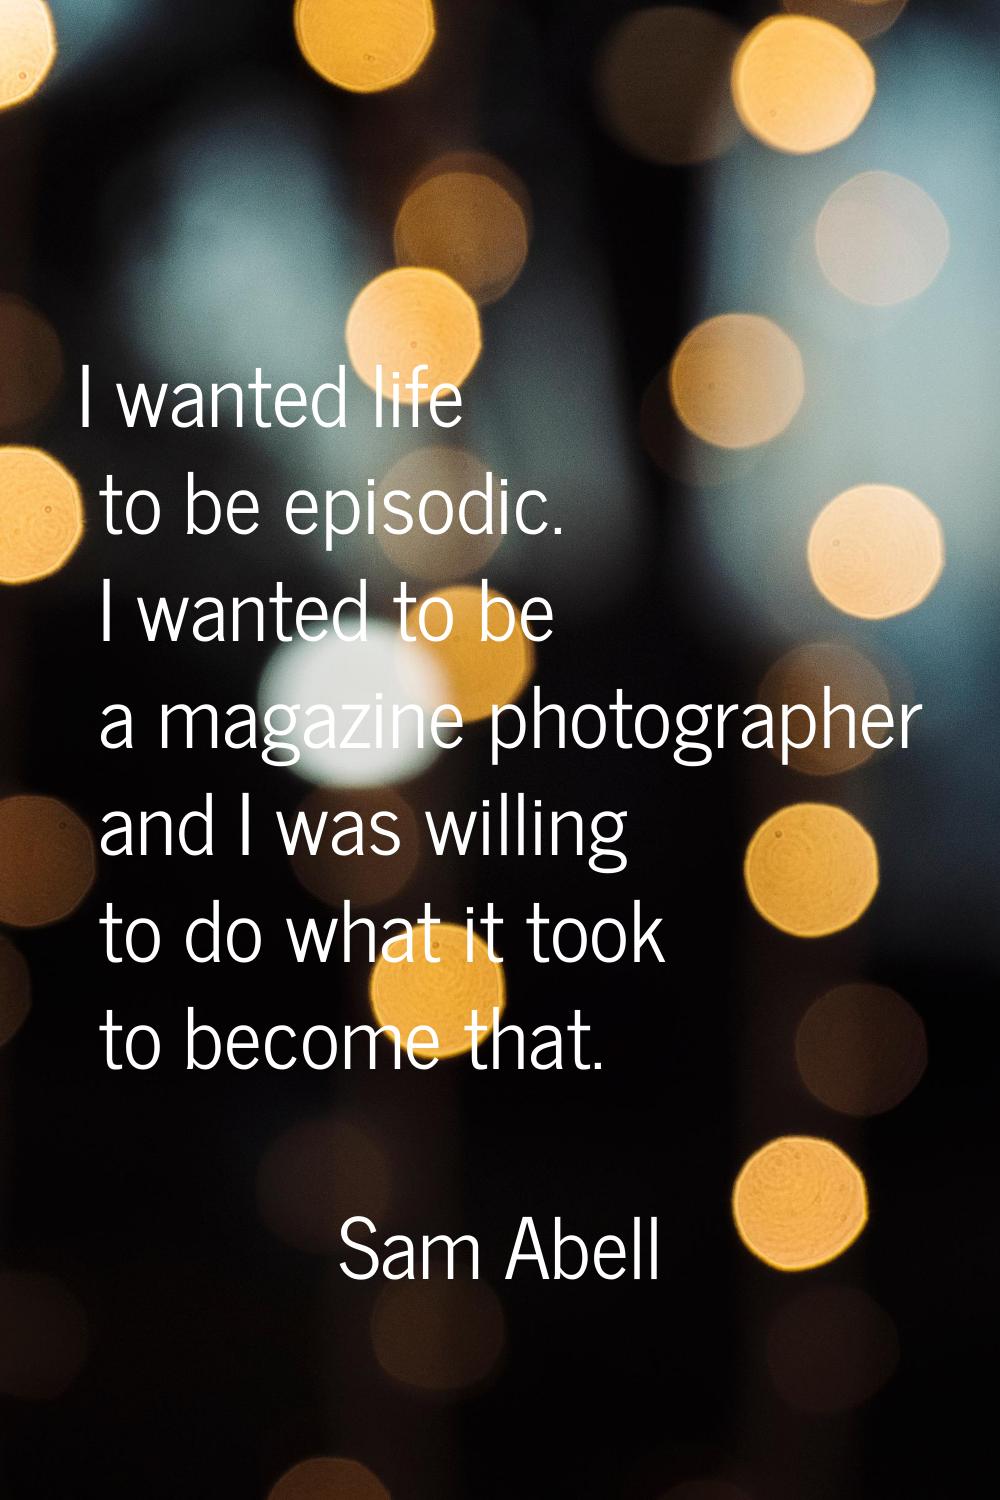 I wanted life to be episodic. I wanted to be a magazine photographer and I was willing to do what i